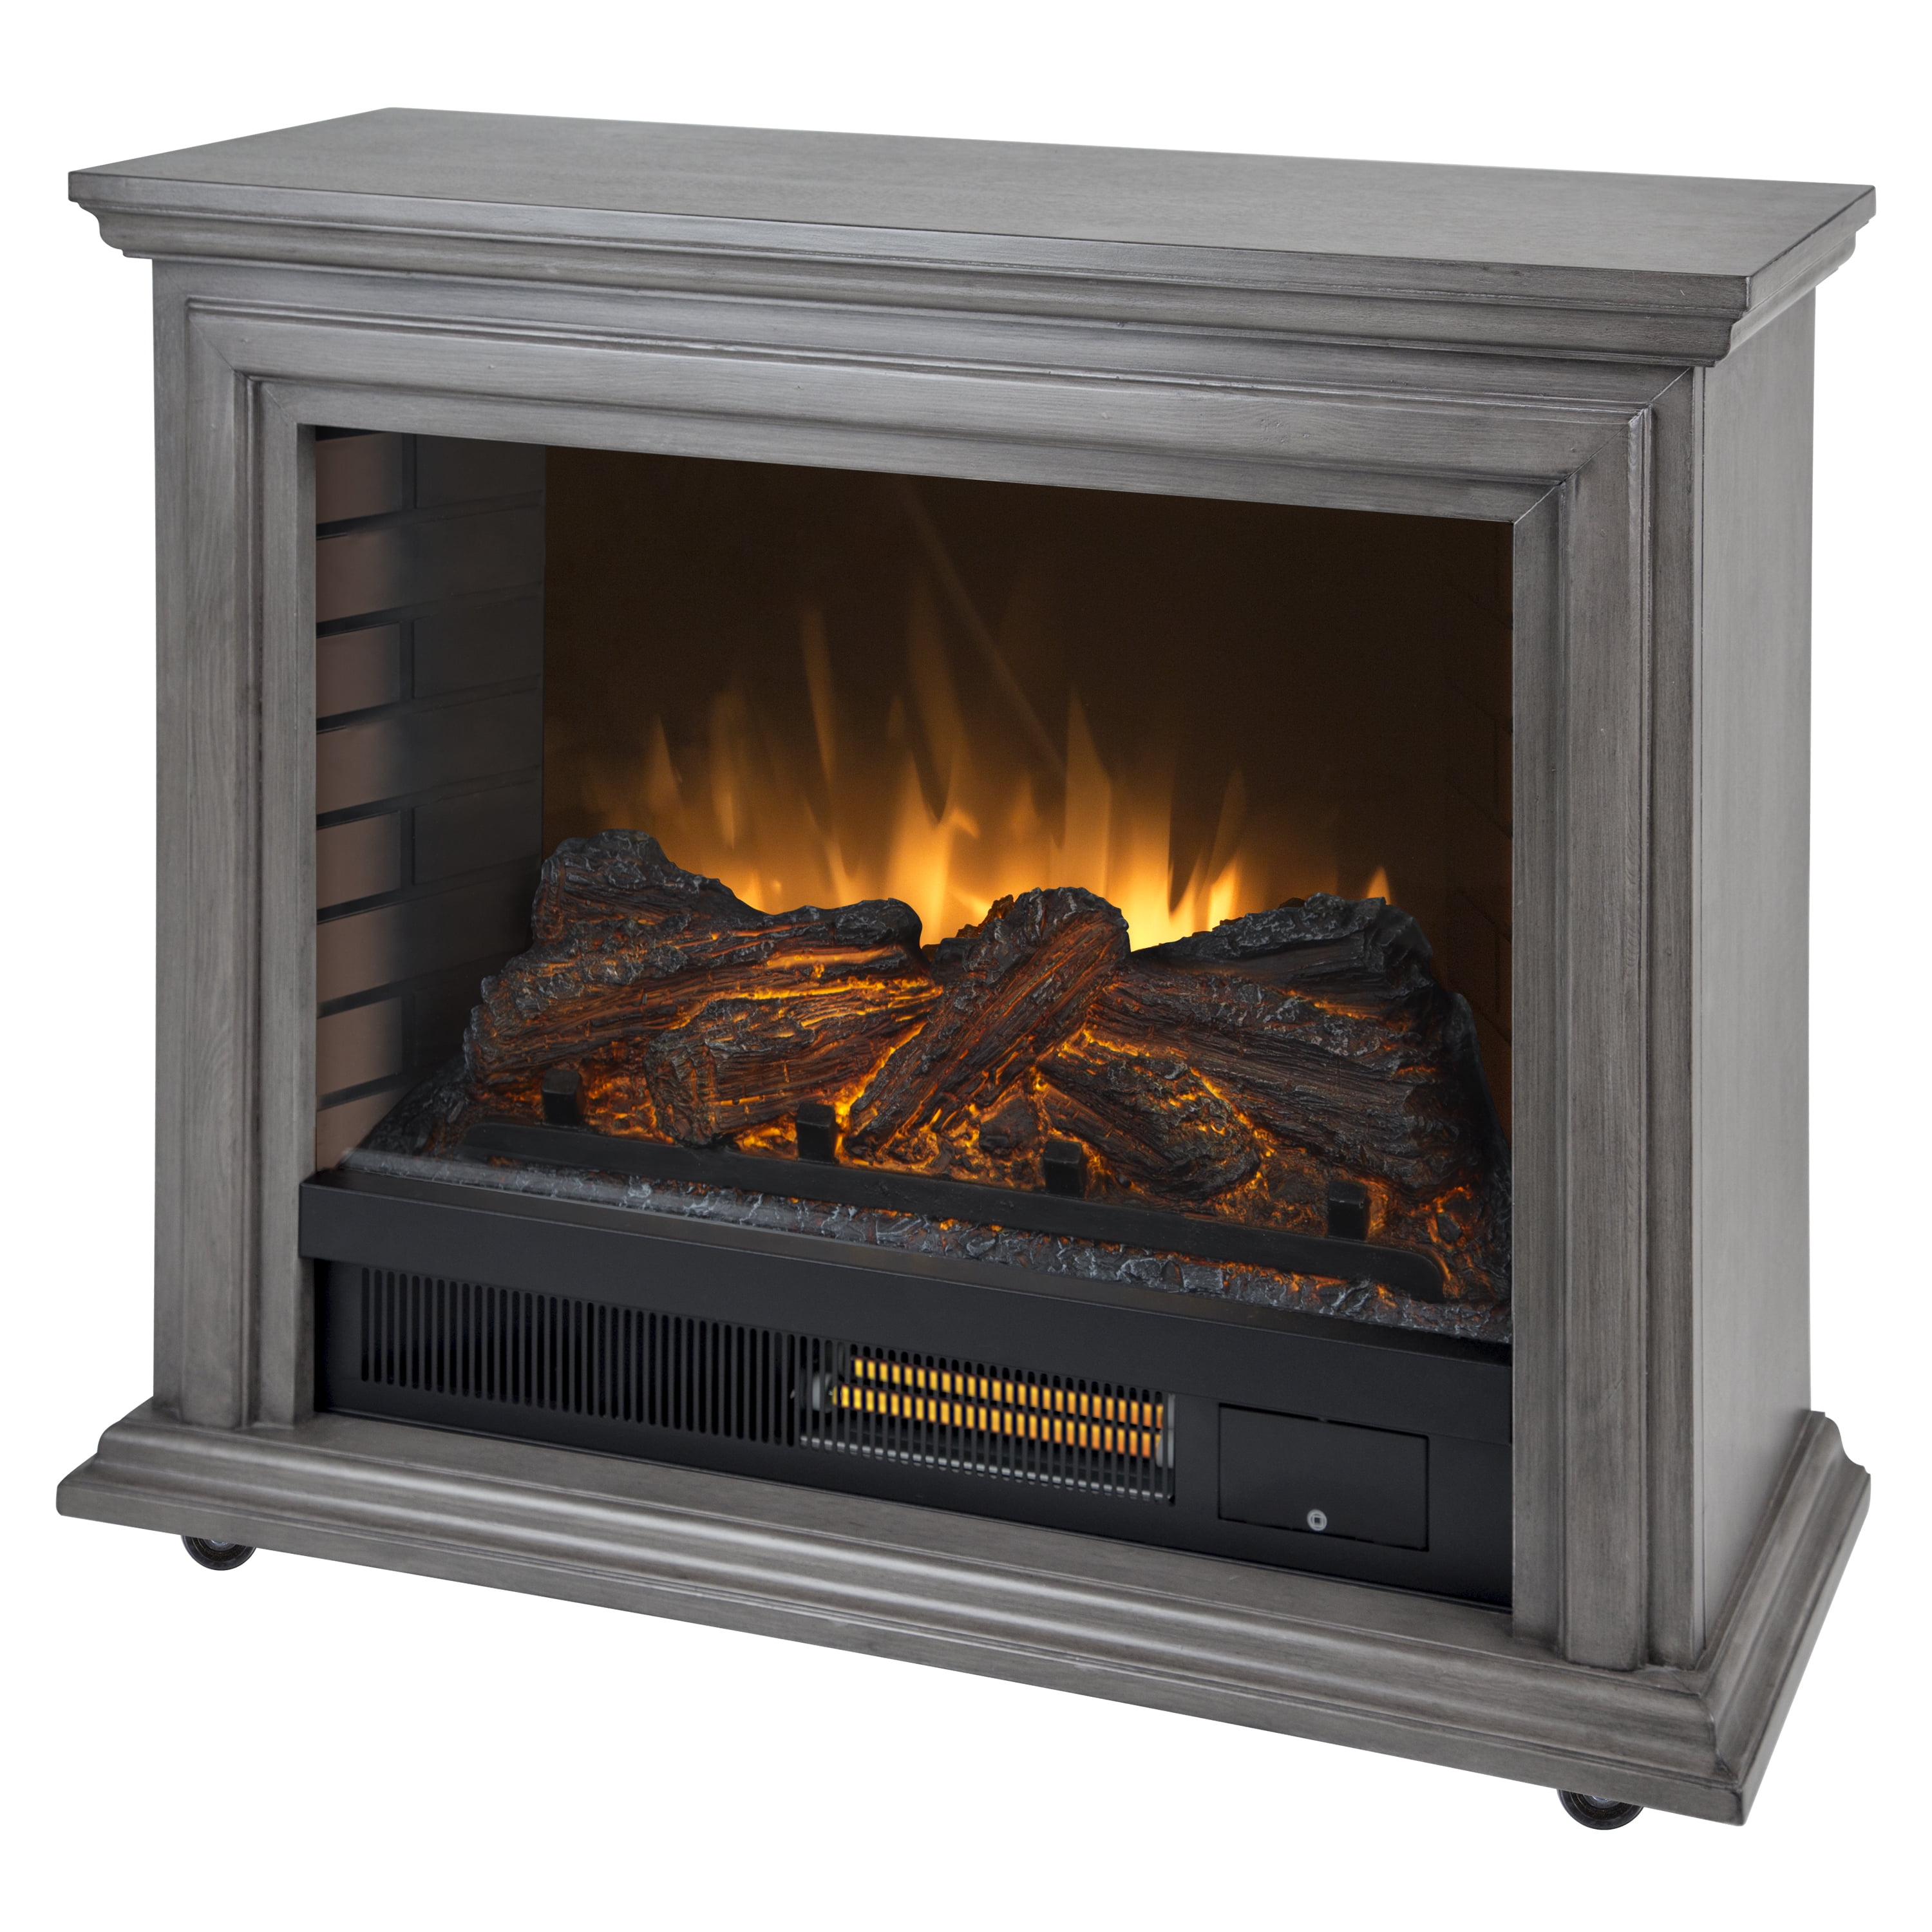 Picture of Dyna-glo 4001512 31.75 in. Pleasant Hearth Sheridan Traditional Infrared Fireplace, Dark Gray